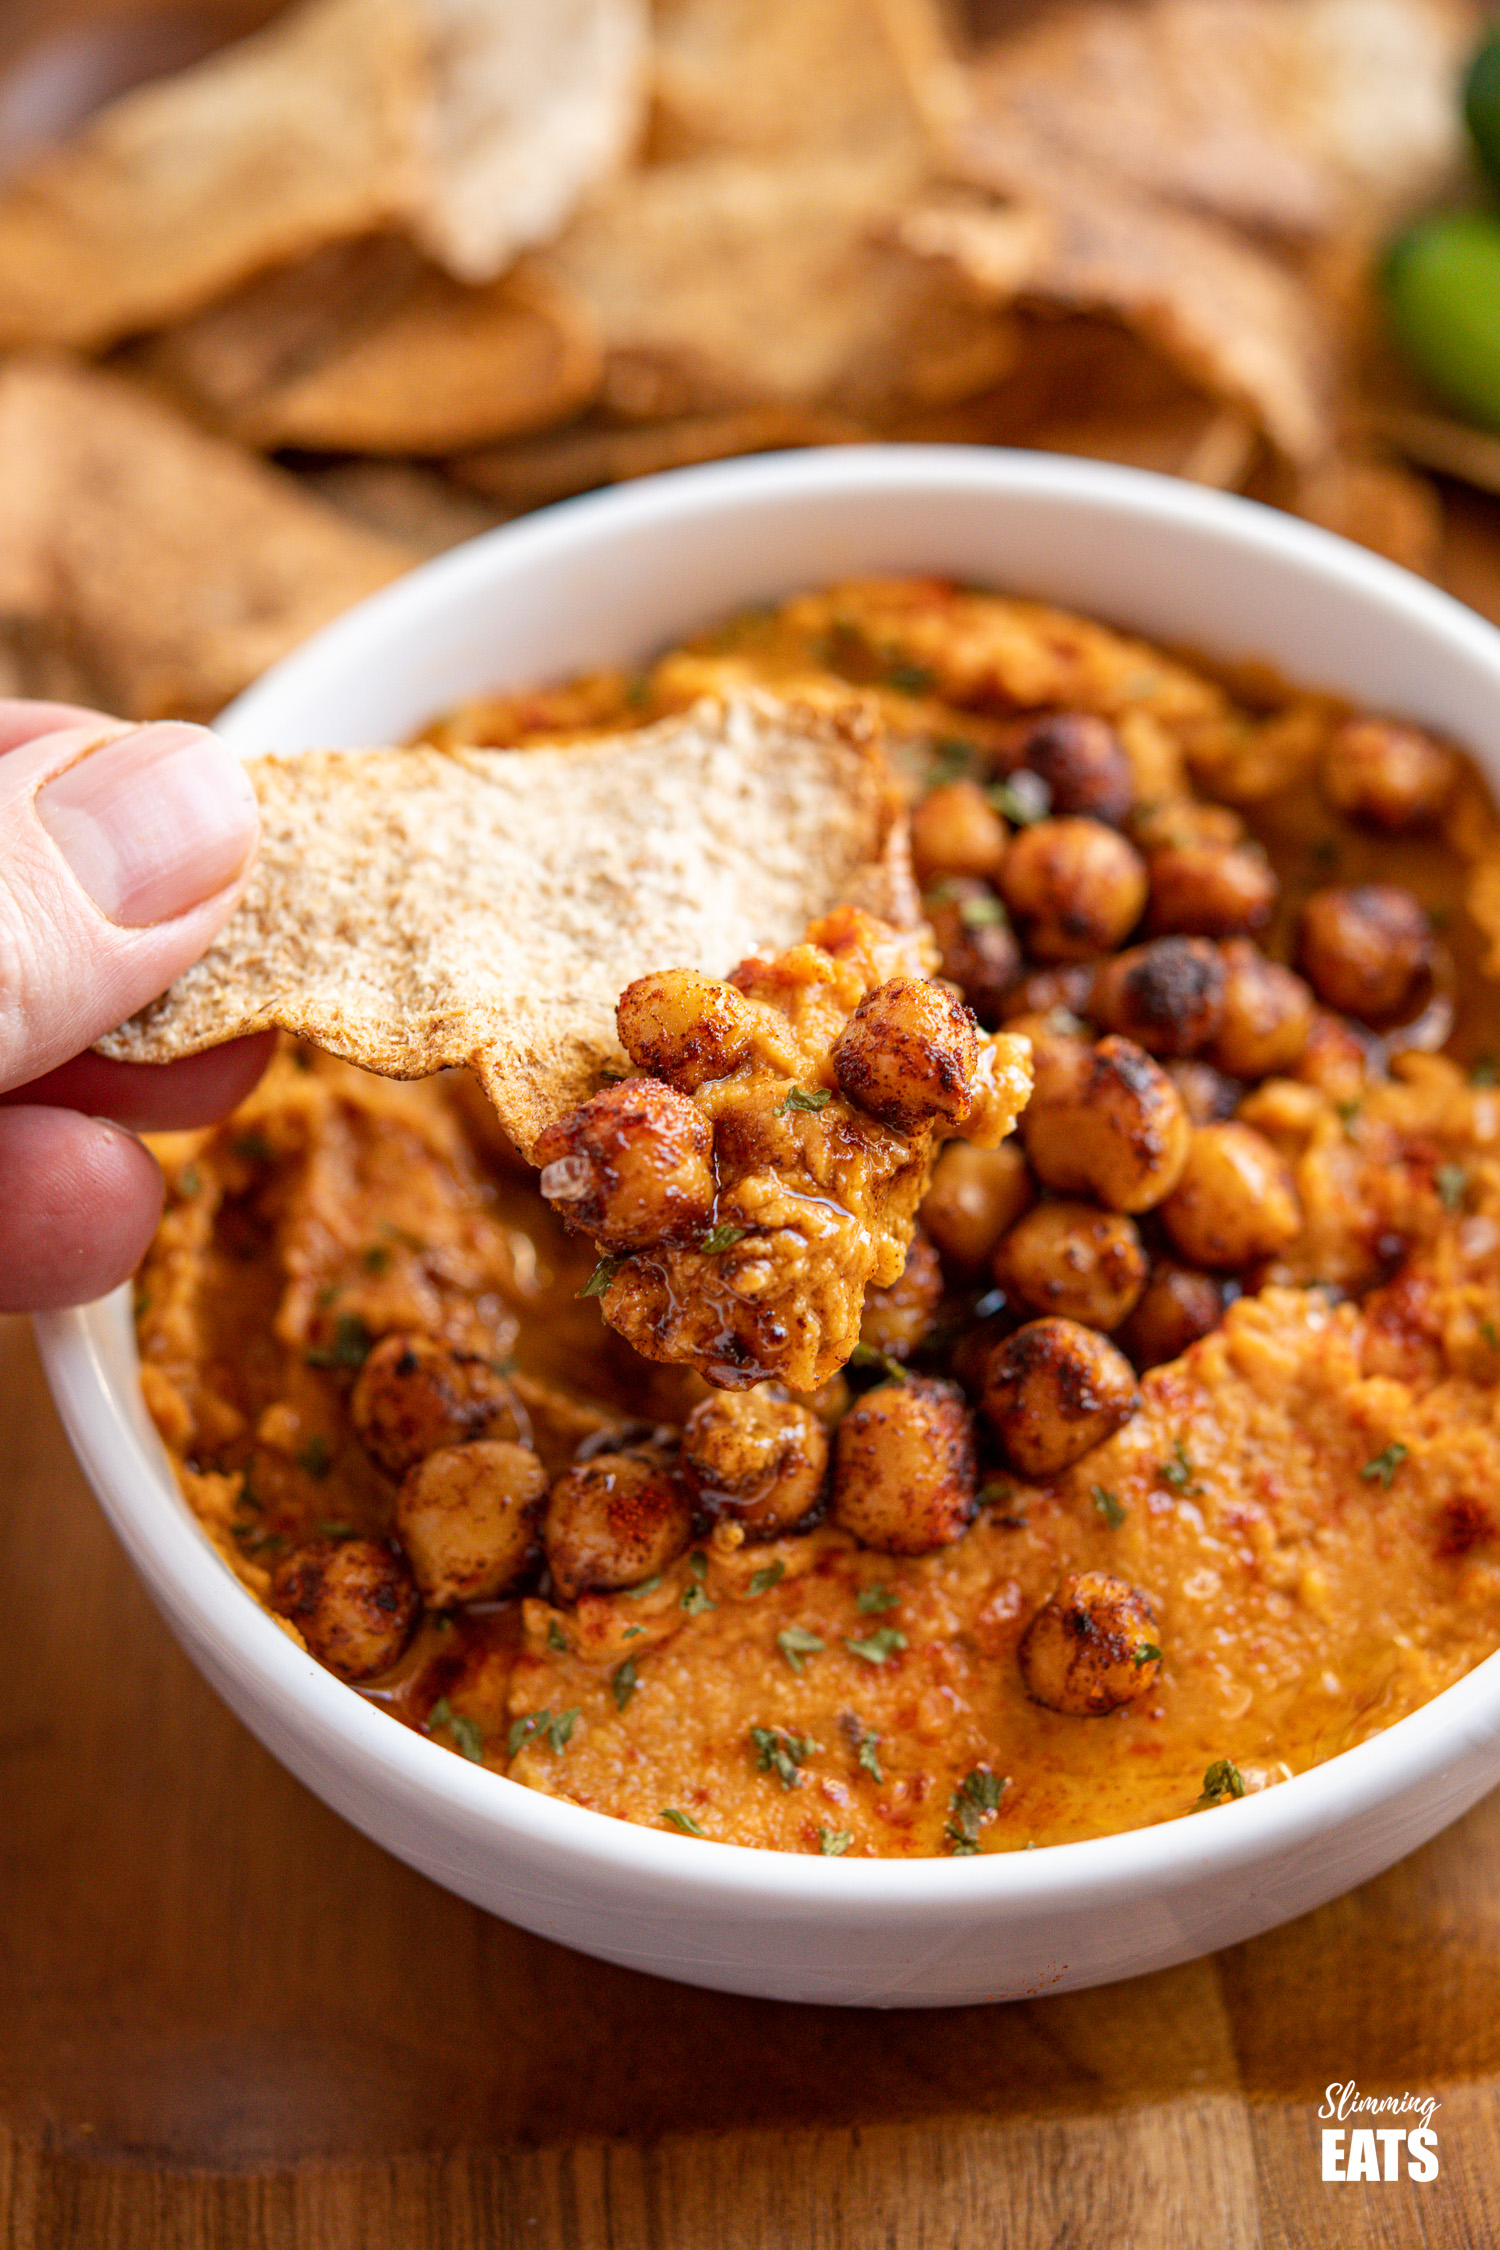 pita chip scooping roasted sweet potato hummus topped with toasted chickpeas from a white bowl